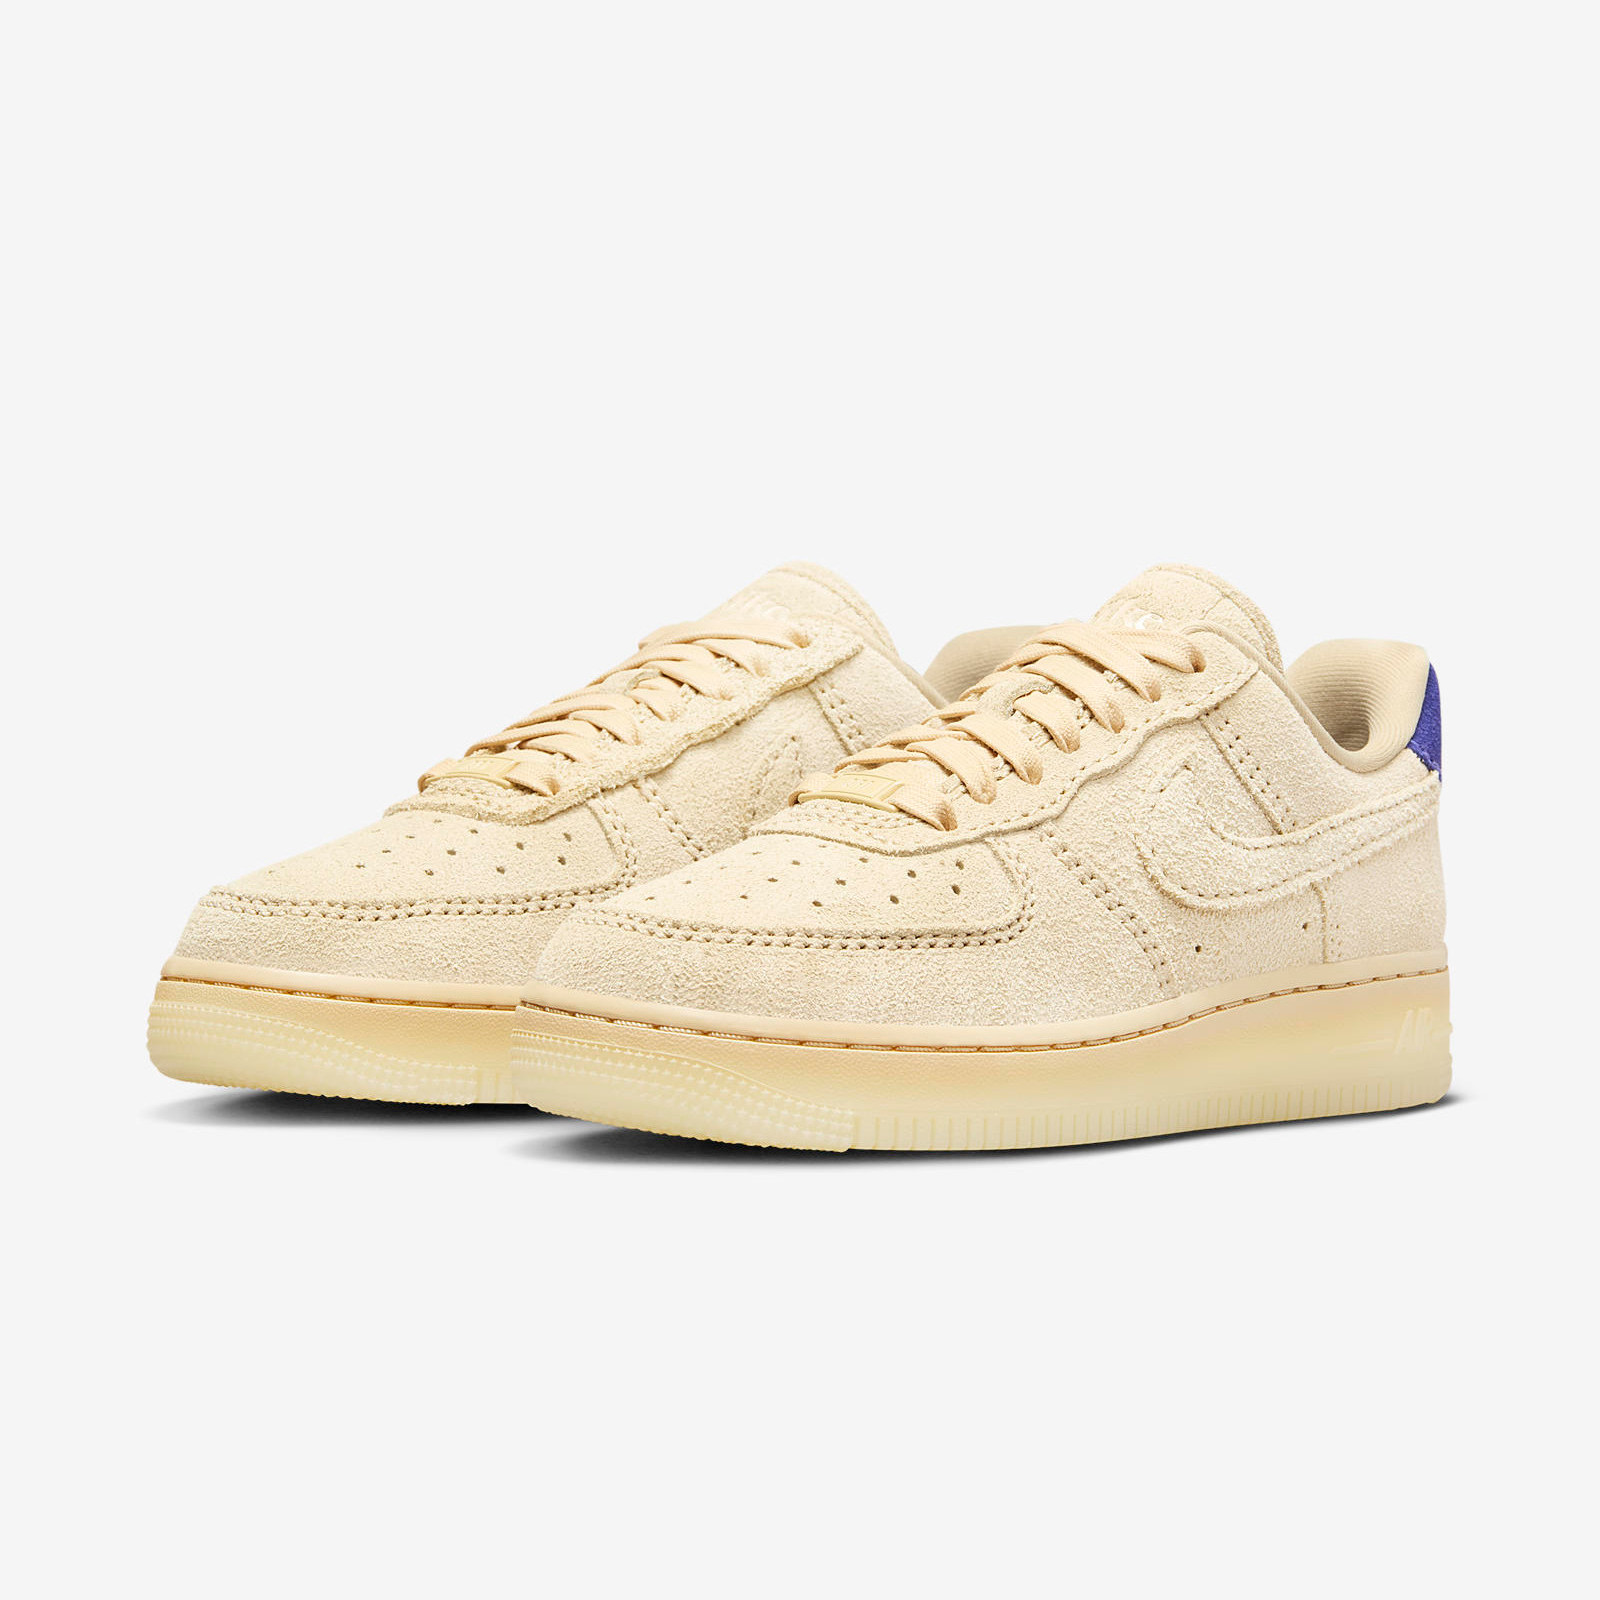 Nike Air Force 1 07 Low
« Elemental Gold »